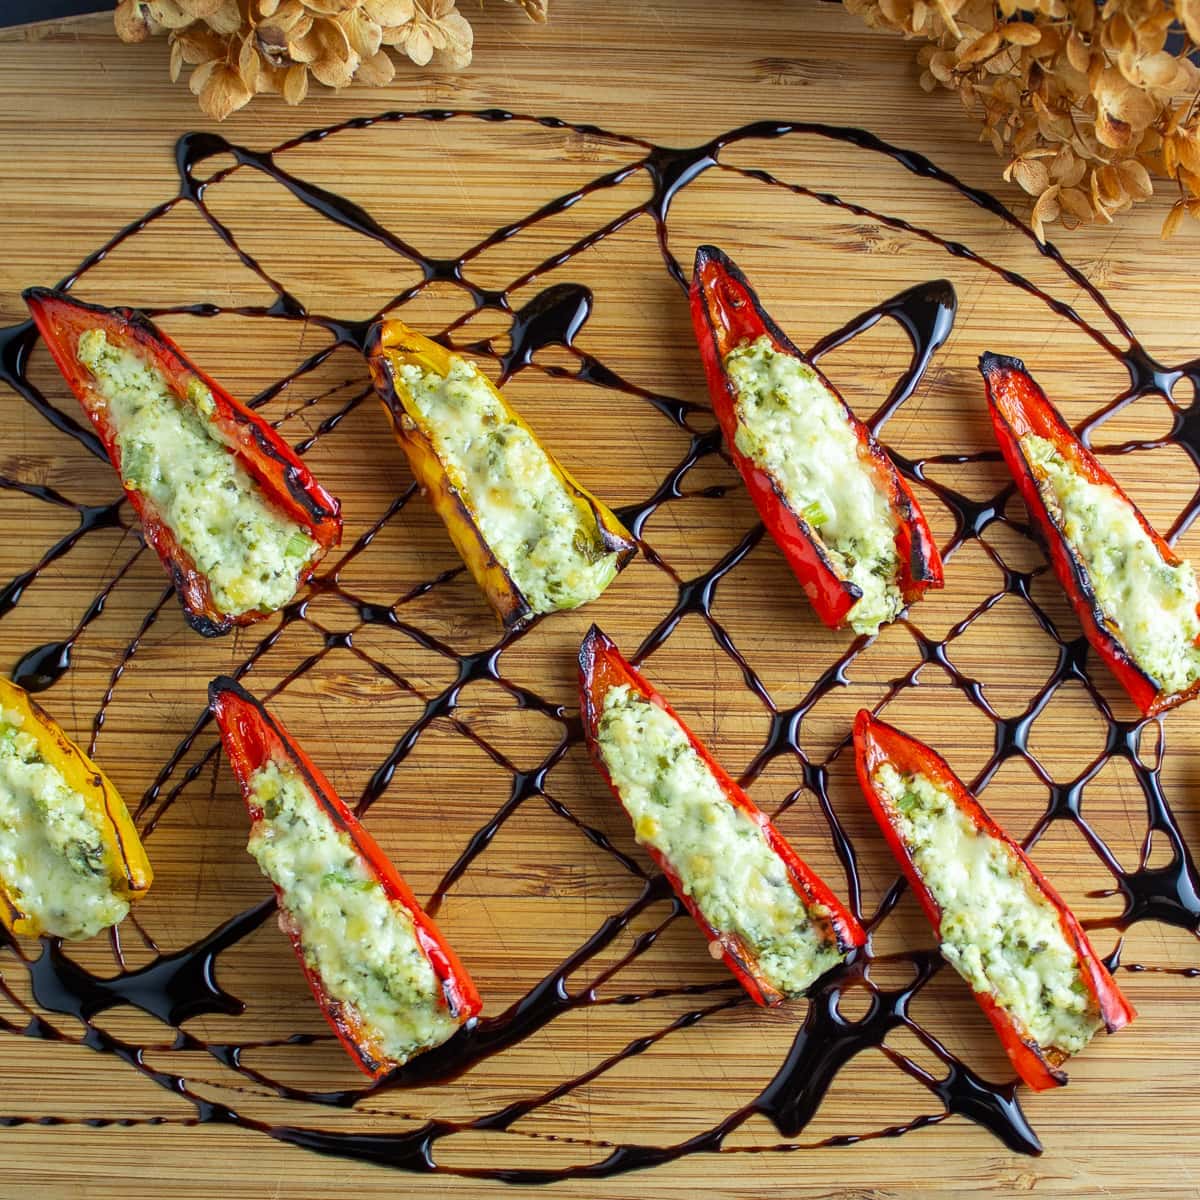 Stuffed Mini Peppers With Goat Cheese on cutting board f